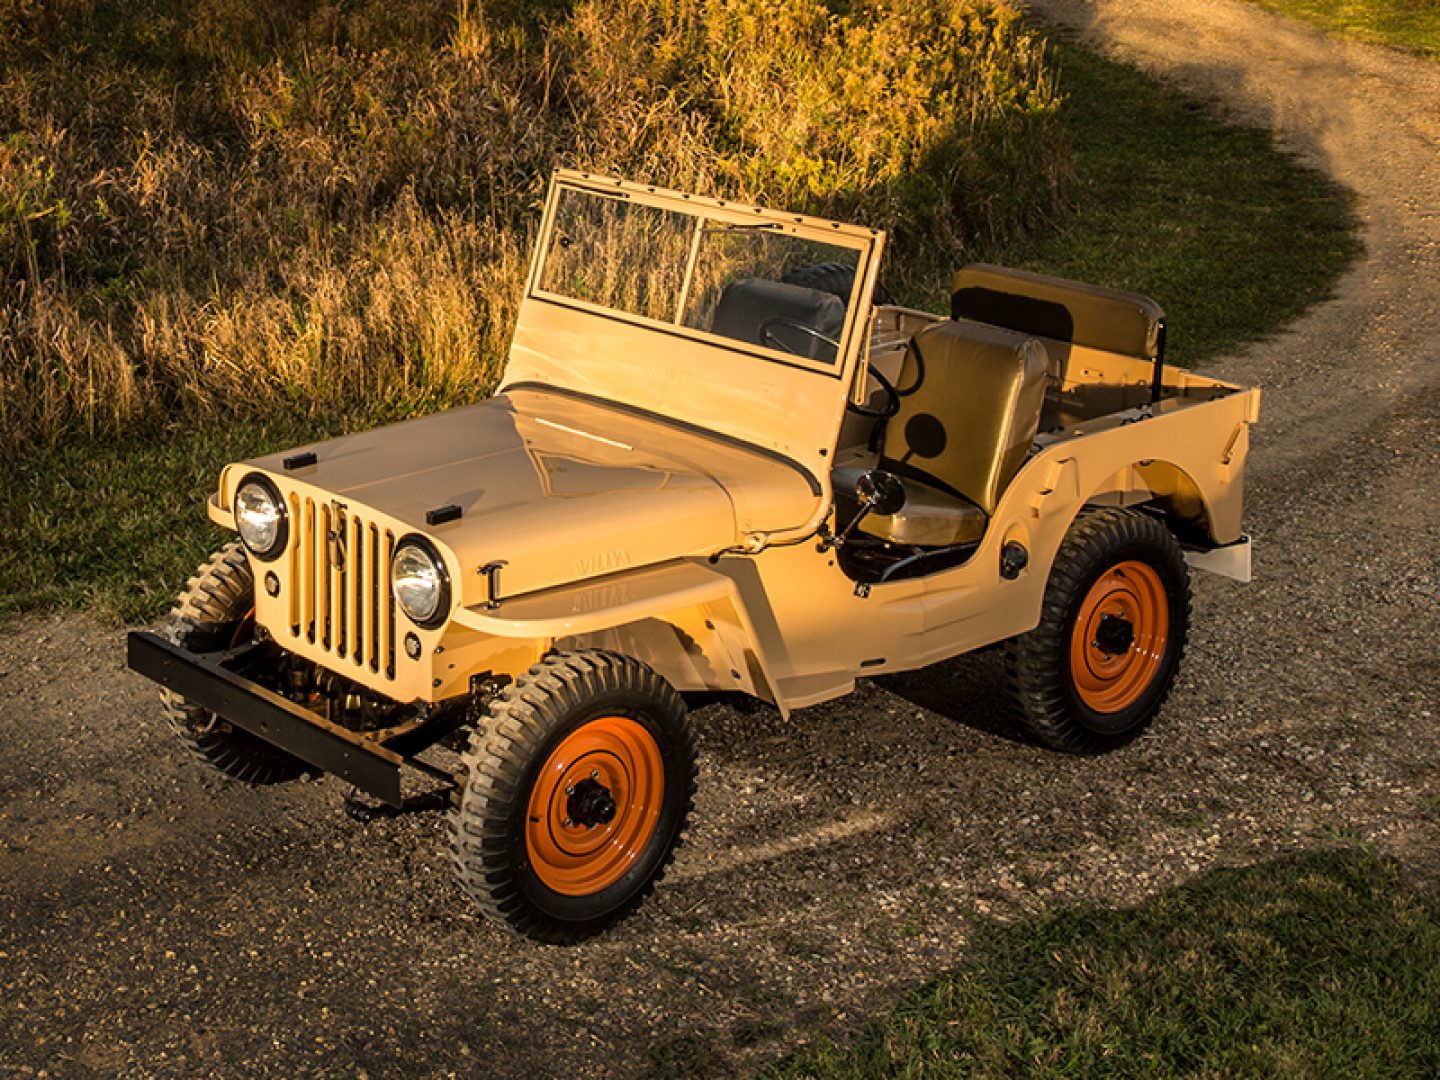 1940s - Jeep History | The Story Of The Legend | Jeep® UK